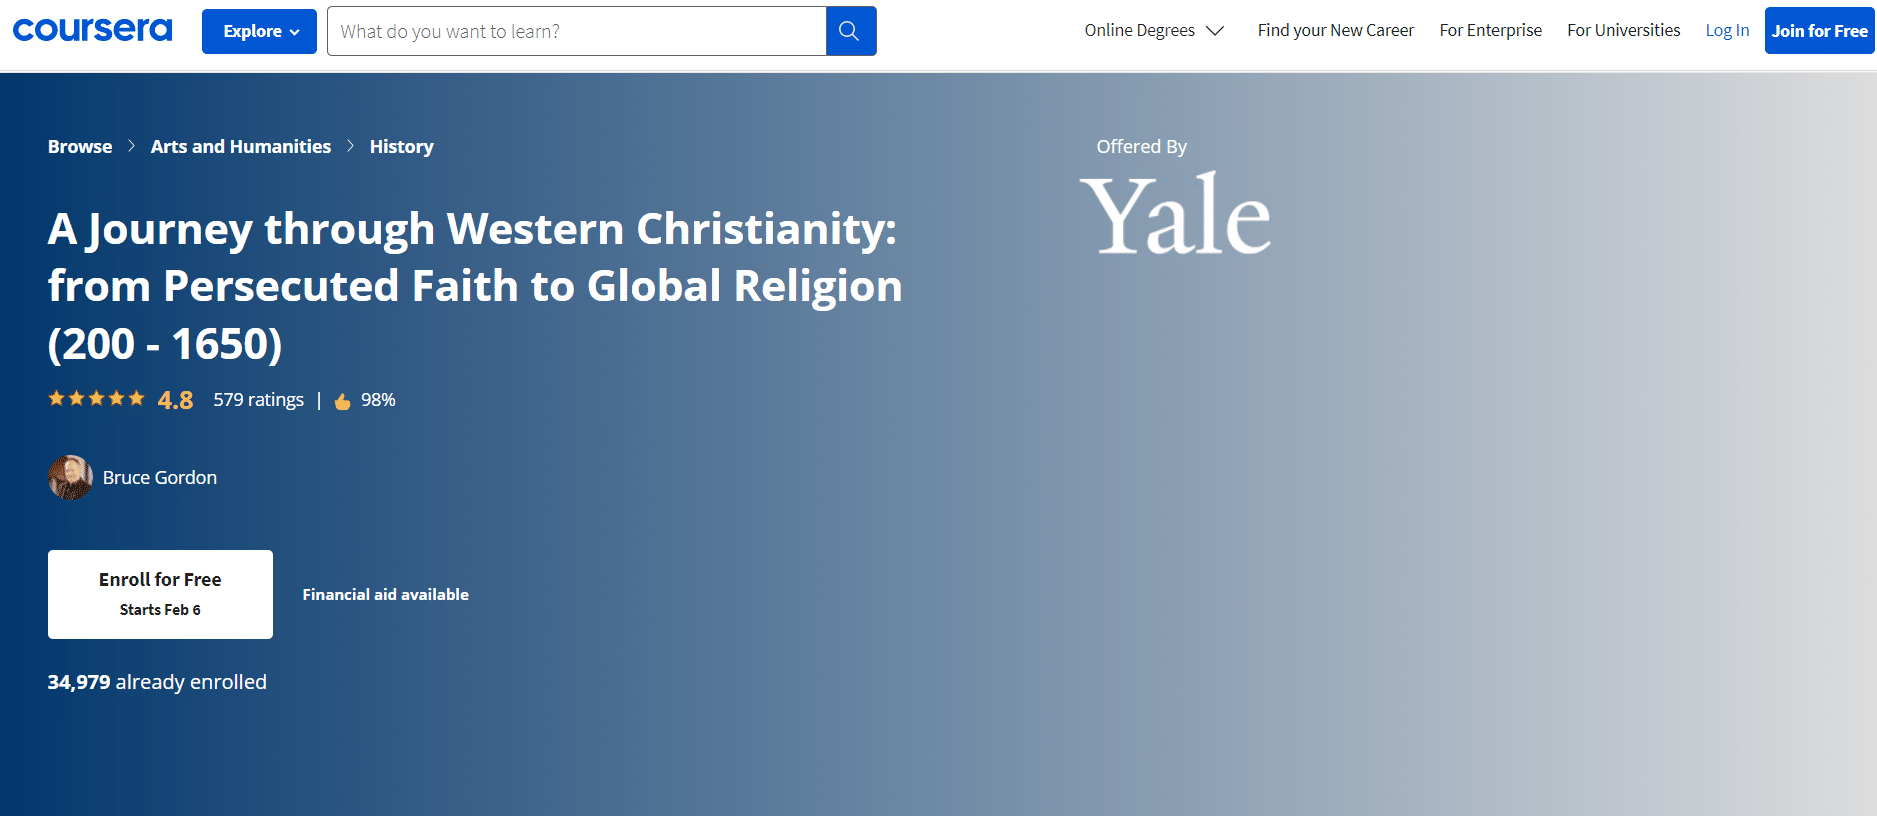 A Journey through Western Christianity from Persecuted Faith to Global Religion (200-1650)